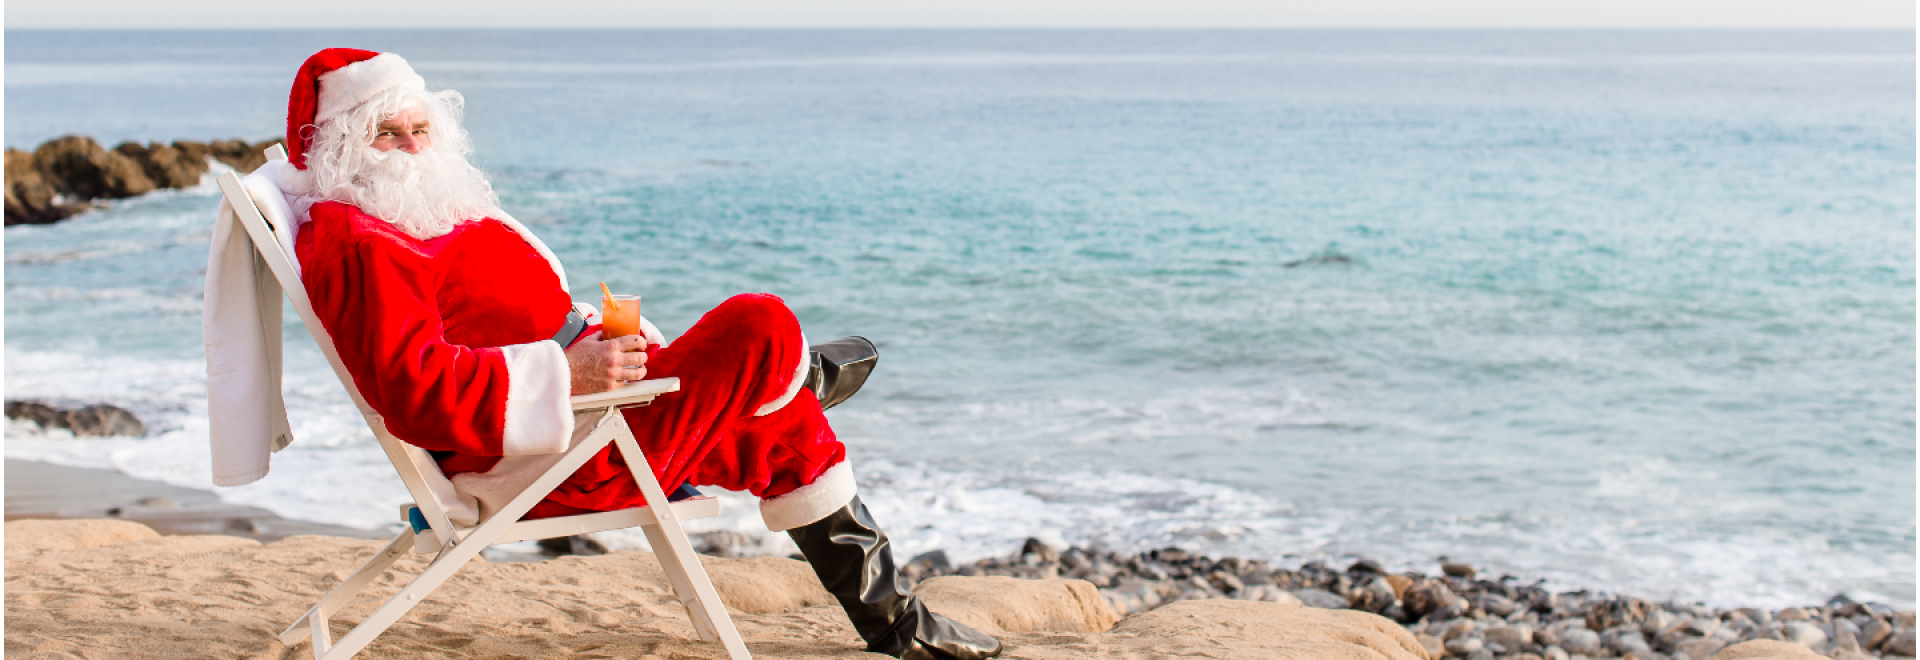 A Person In A Santa Suit Sitting On A Chair By The Water